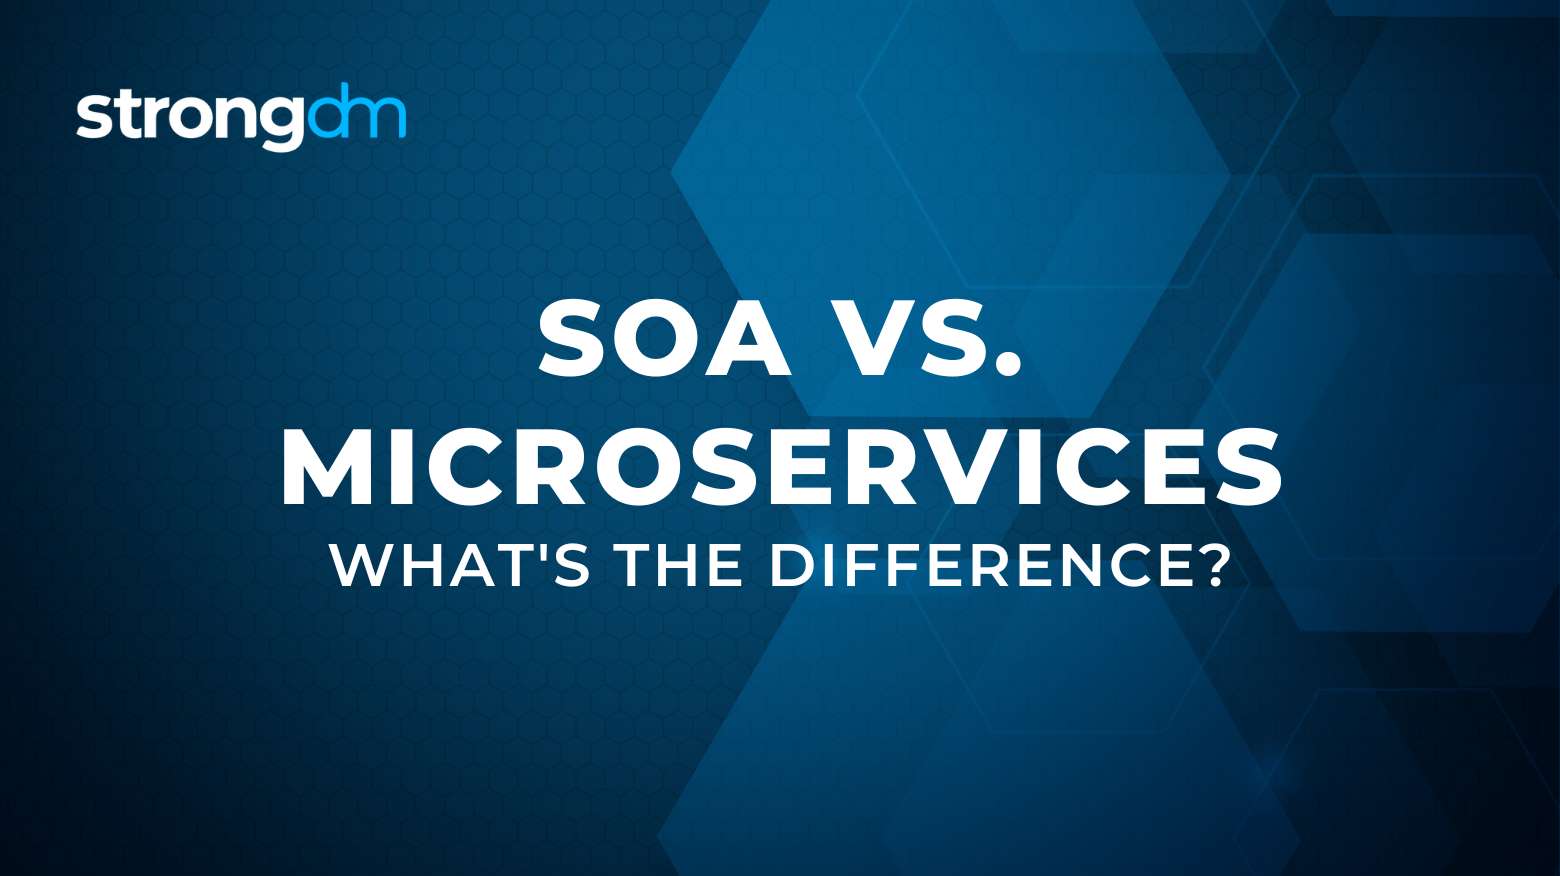 Comparing SOA and Microservices: What's the Difference?